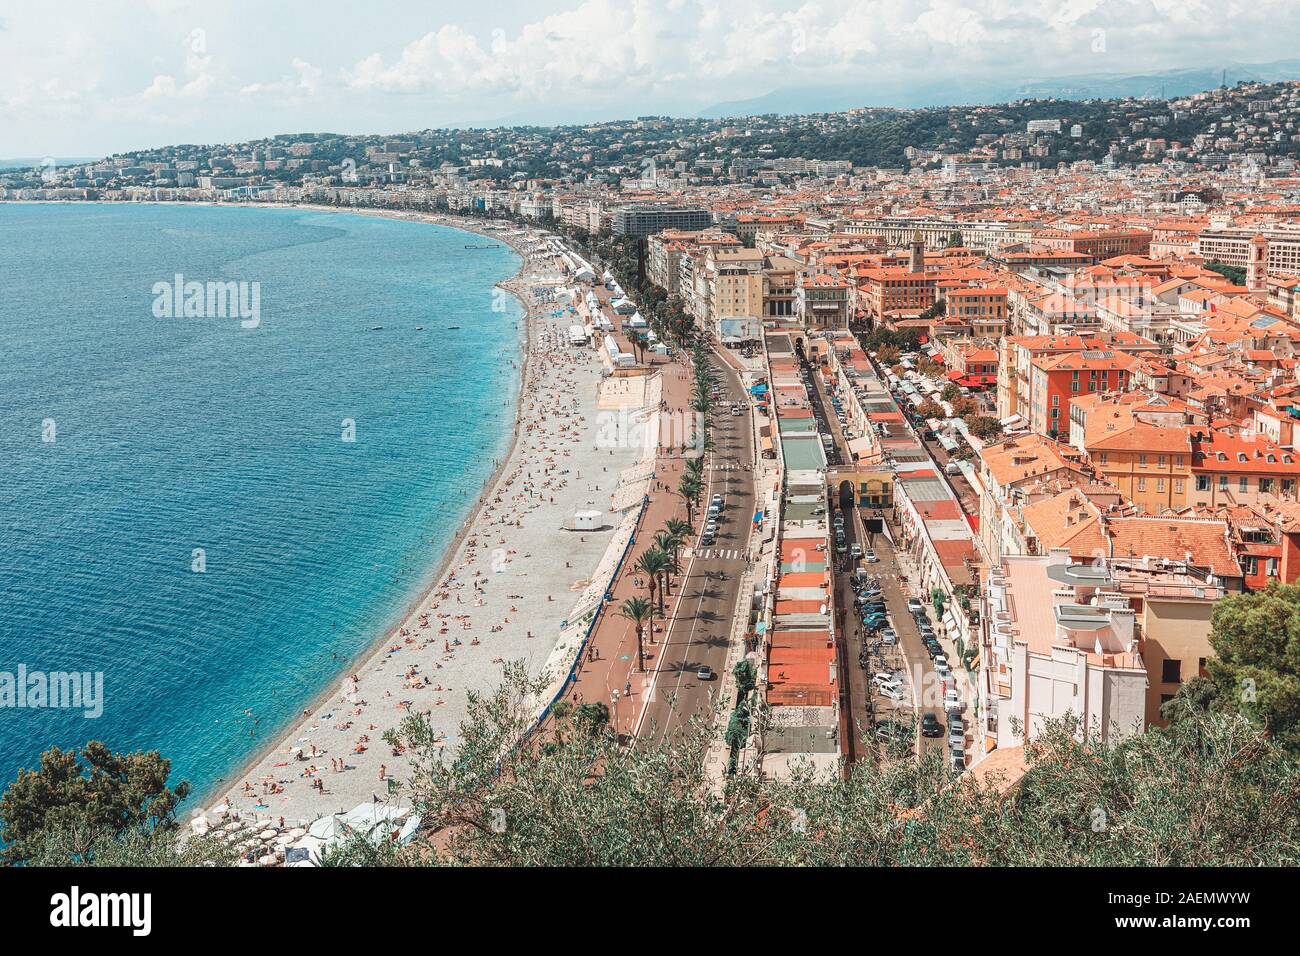 The public baths Plage de Castel and Plage des Ponchettes in the city of Nice with the well known promenade quai des etats Unis along in France Stock Photo